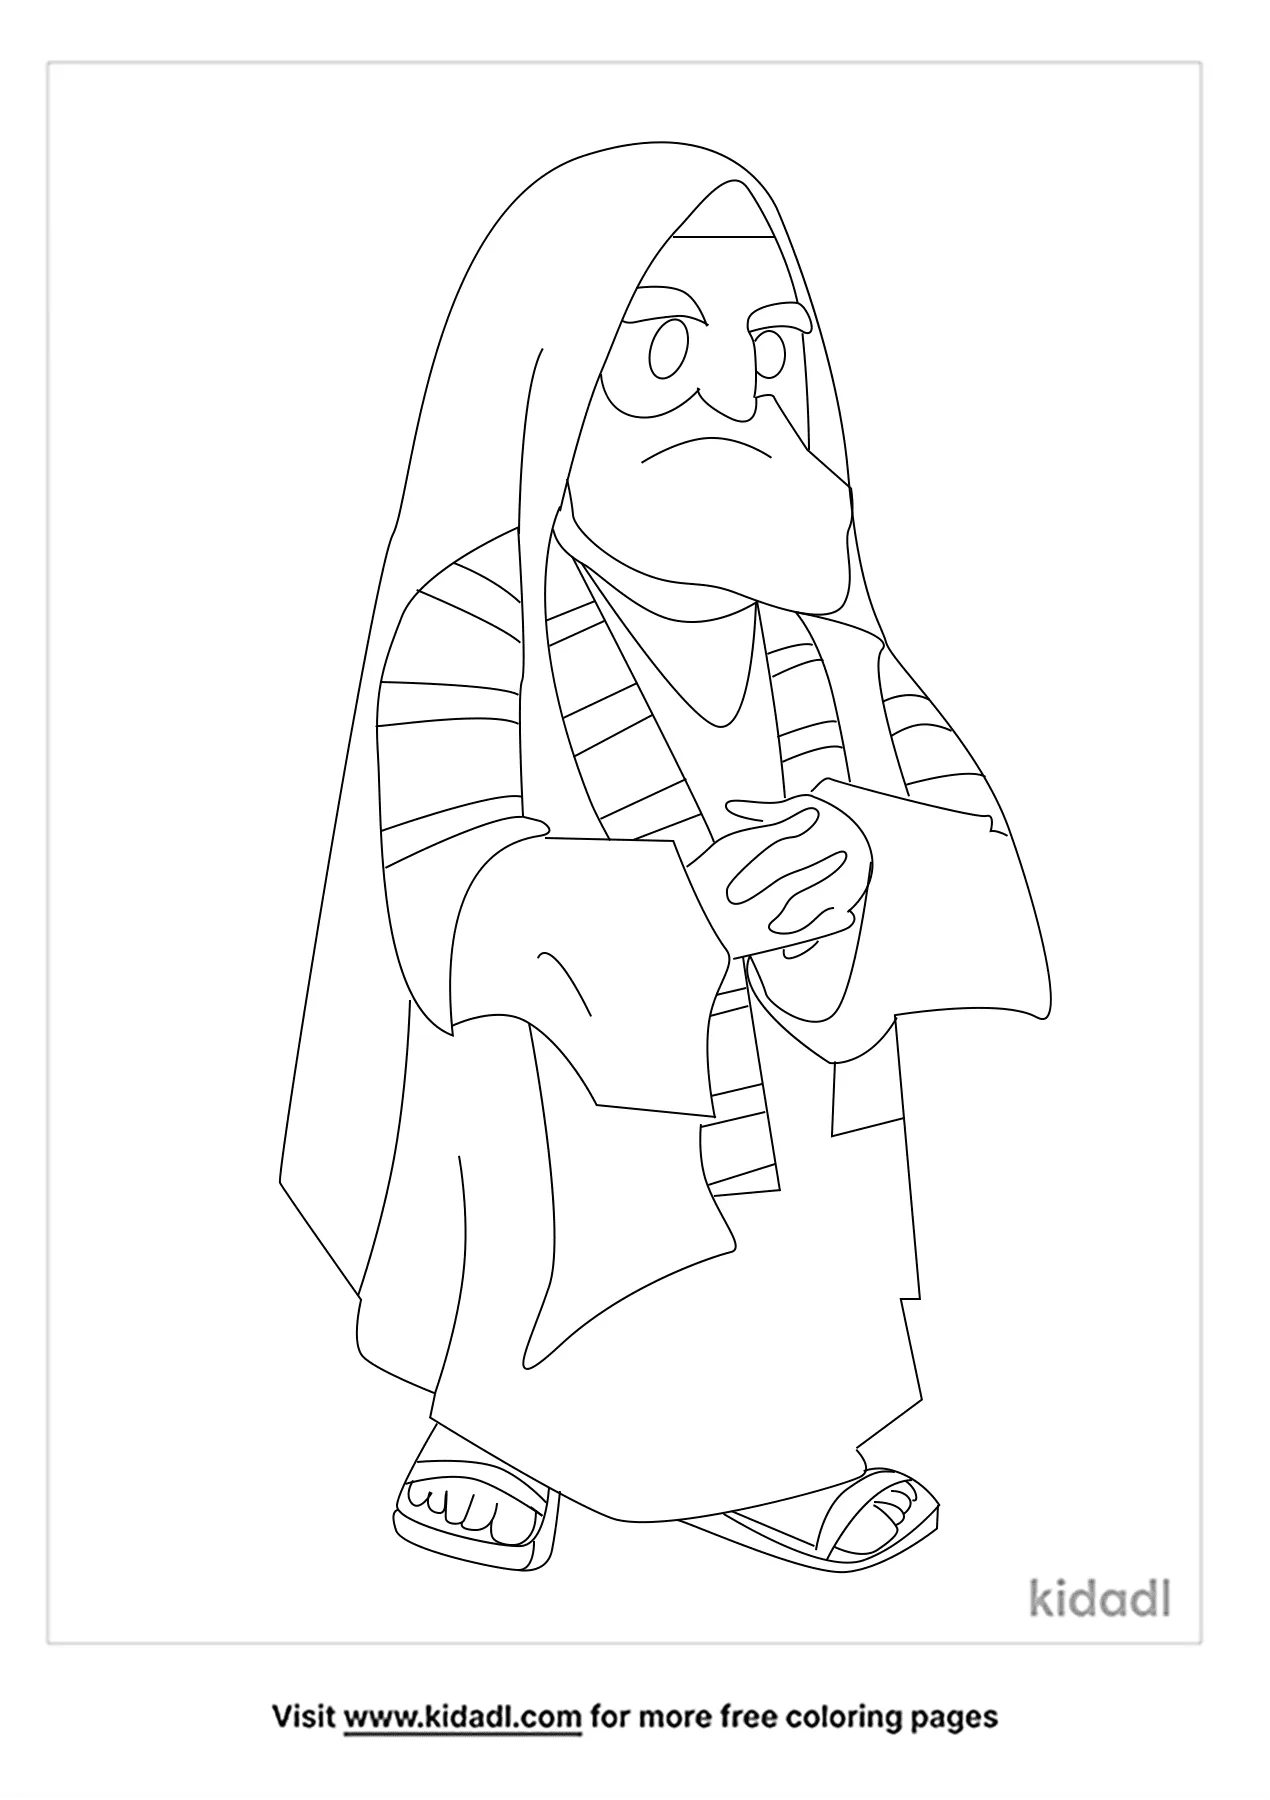 Free pharisee and the tax collector coloring page coloring page printables